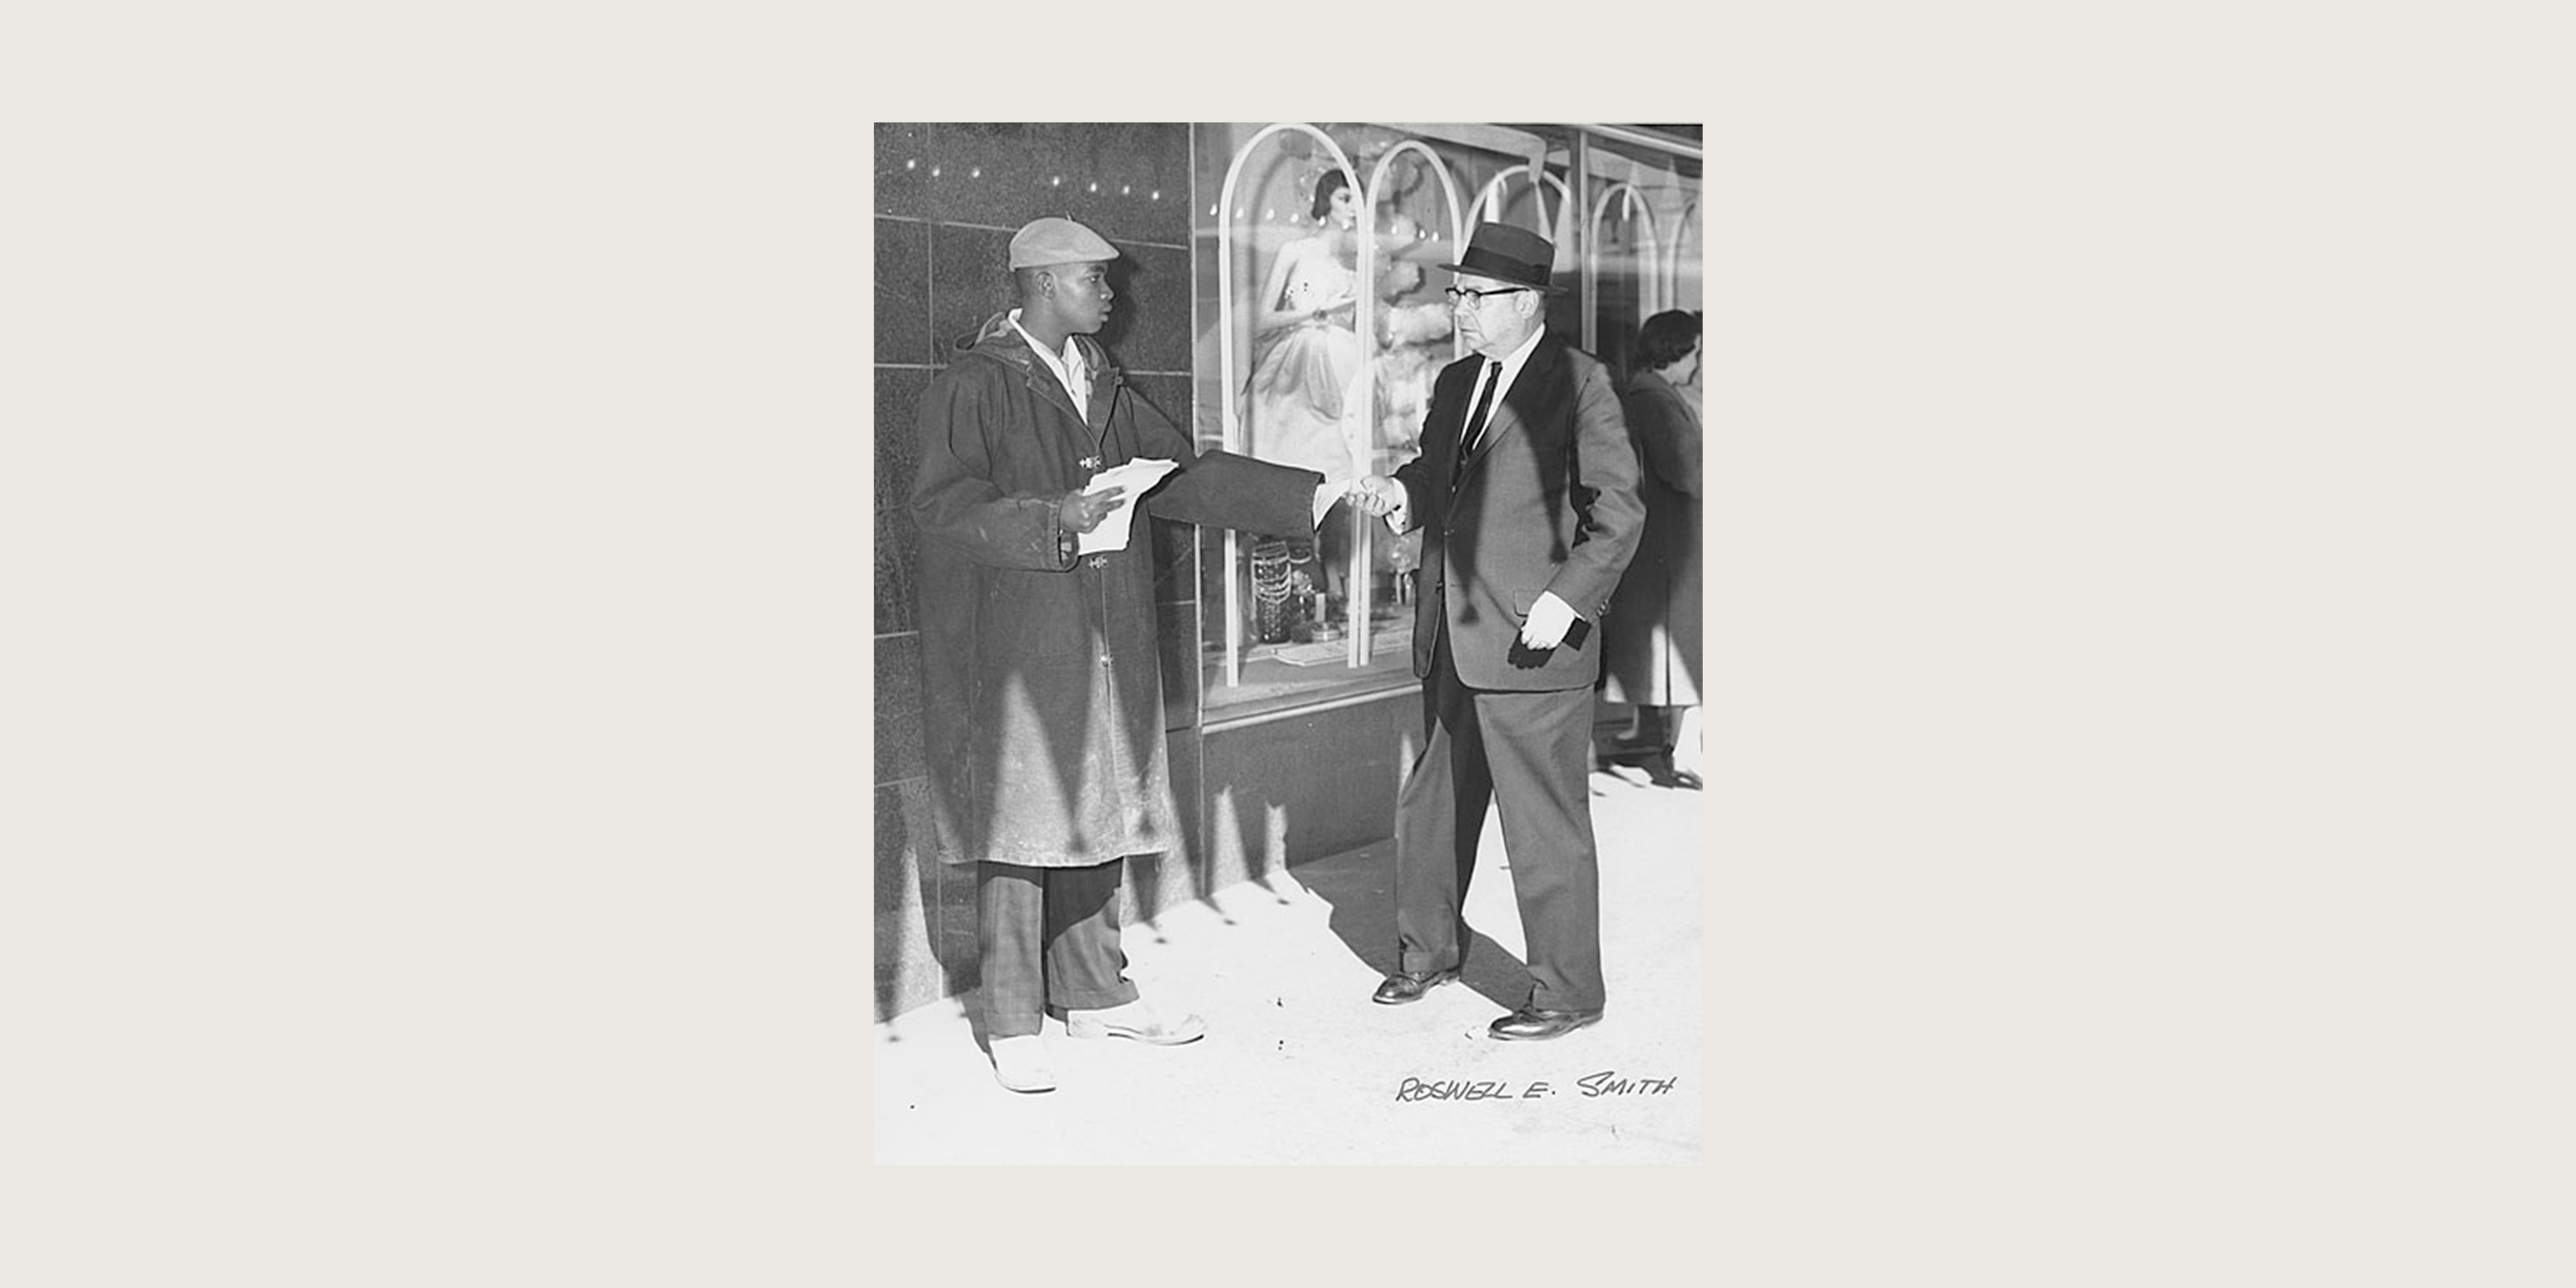 An unidentified student hands out flyers in front of Rich’s department store